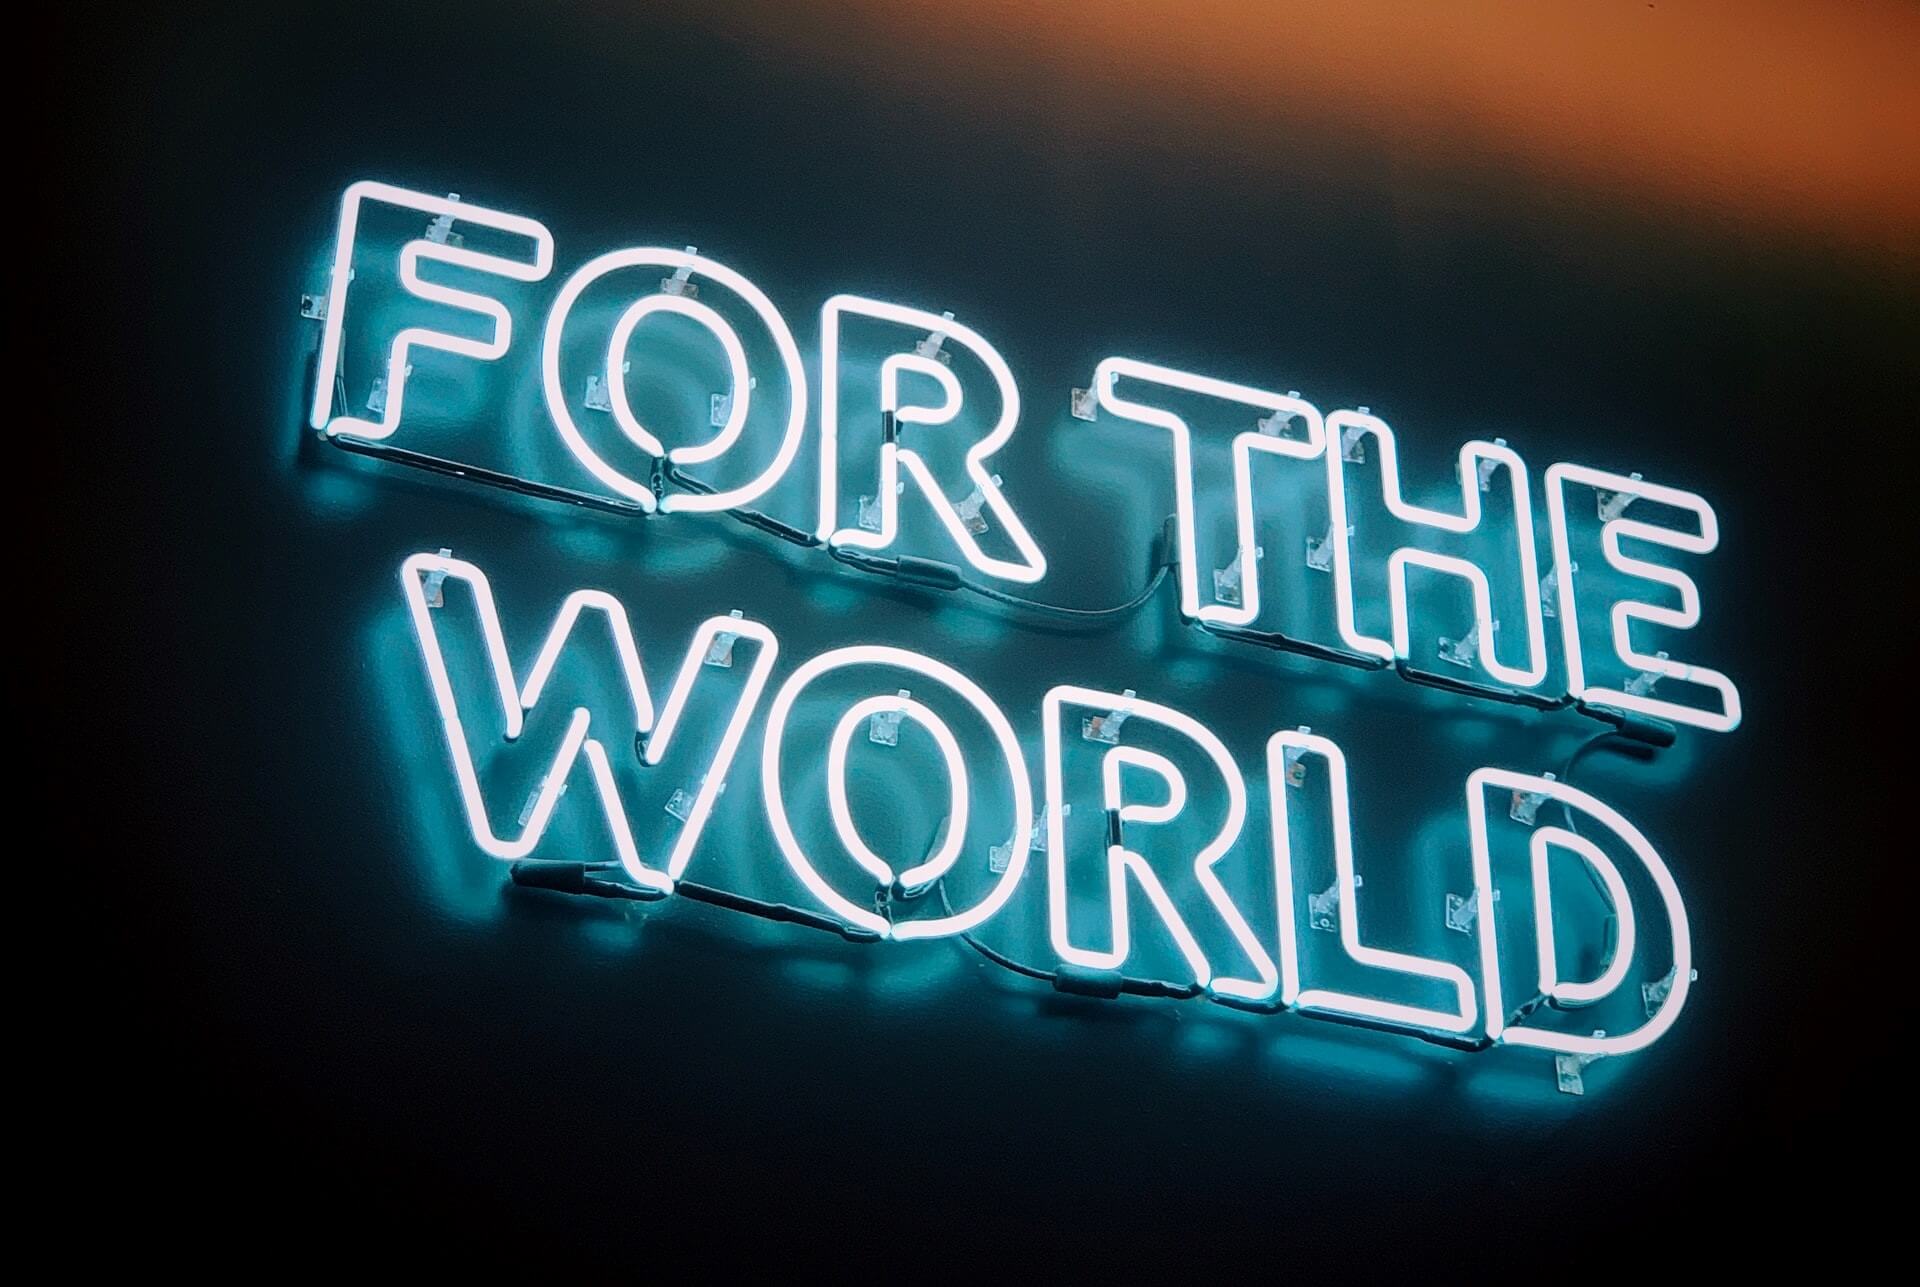 "For the World" neon sign